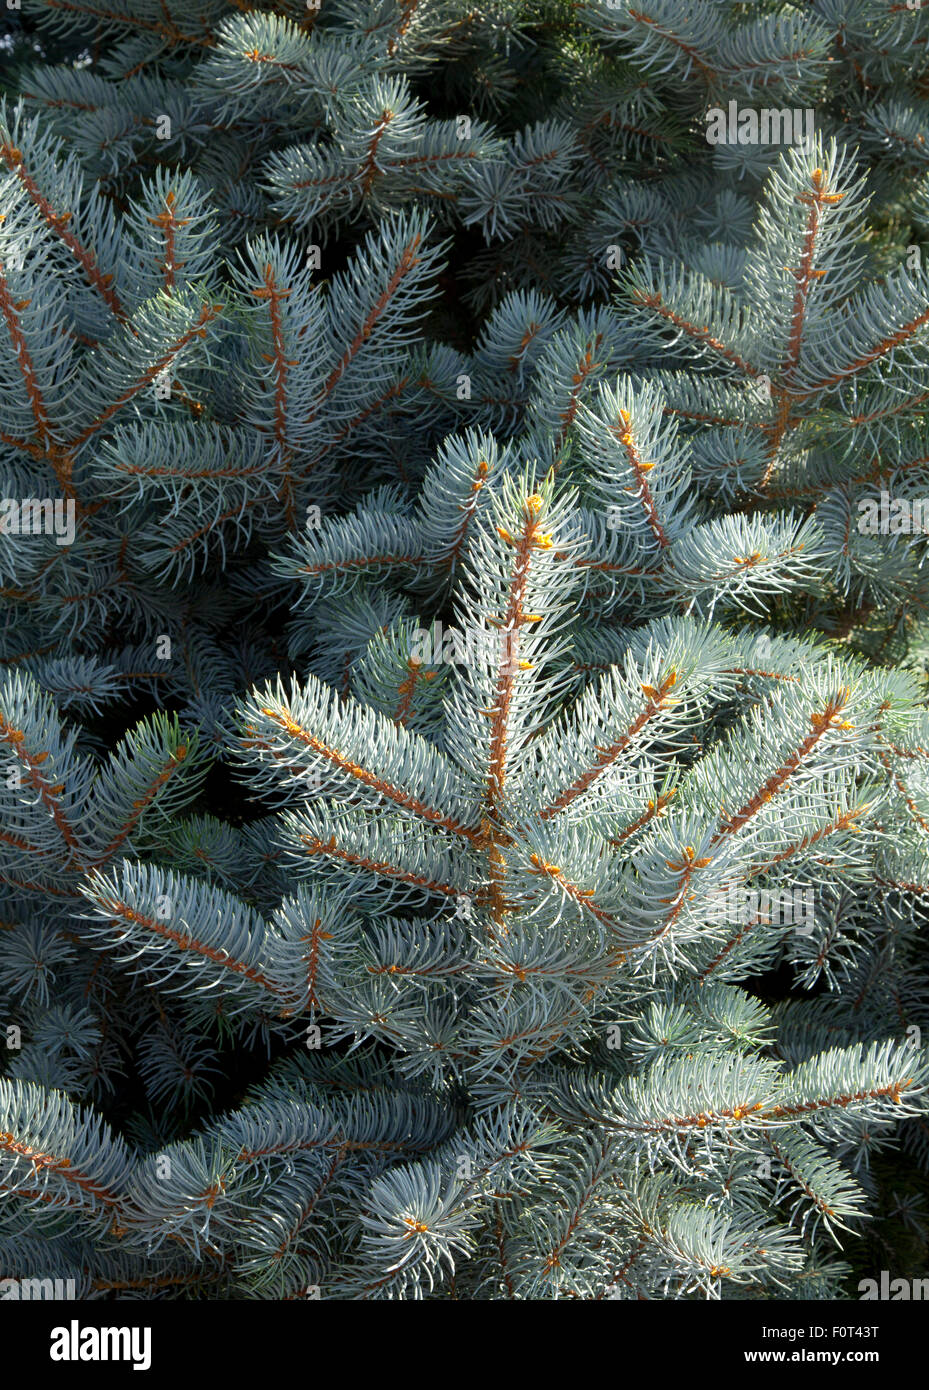 Closeup of Blue Spruce tree branches, picea pungens, 2015 Stock Photo